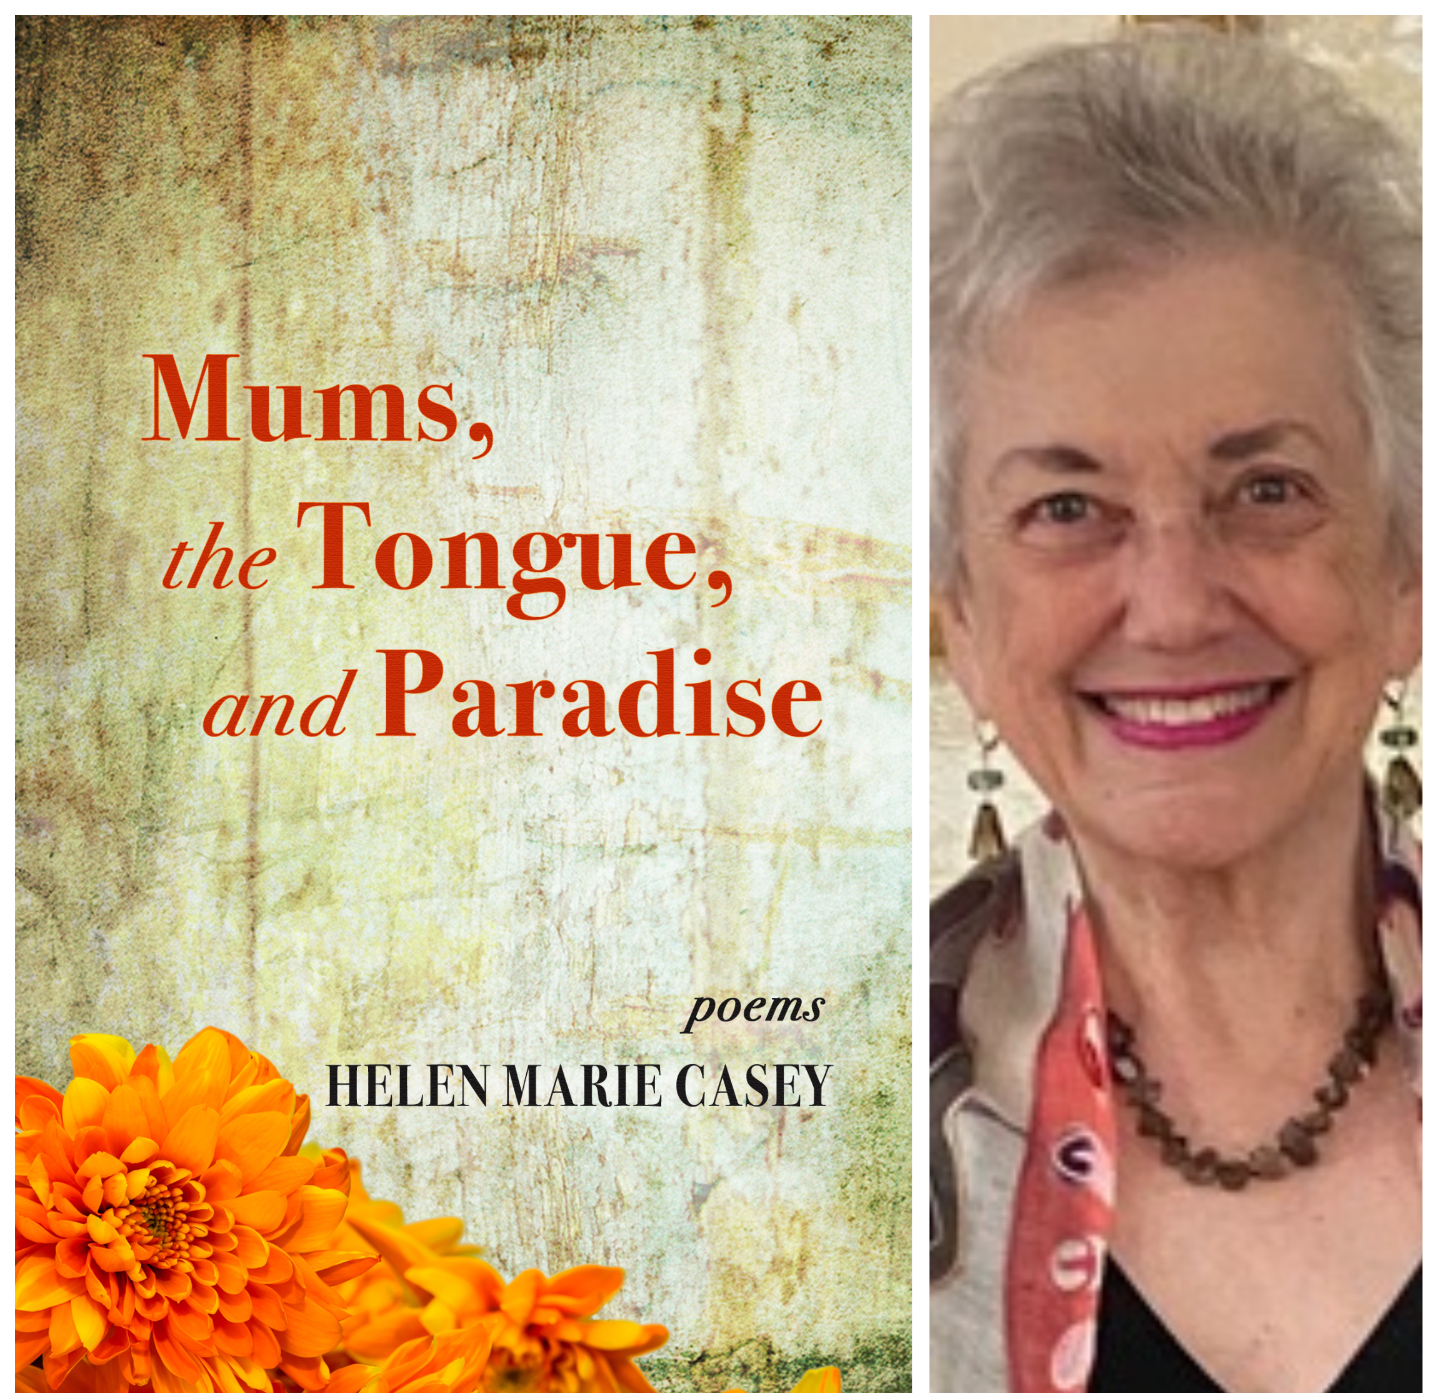 Mums, the Tongue, and Paradise by Helen Marie Casey